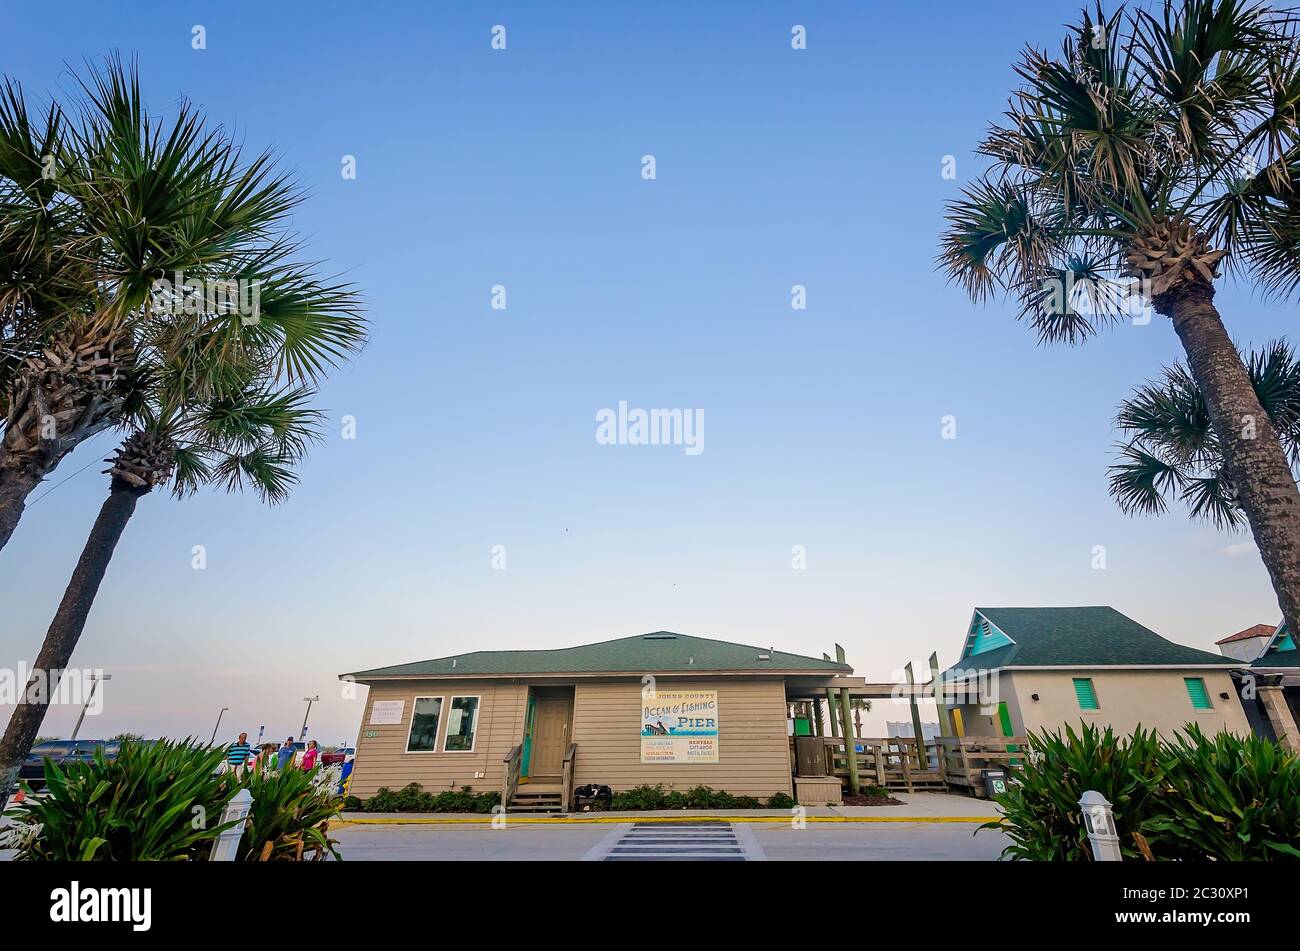 Pine trees flank the entrance to St. Johns County Ocean Pier, April 14, 2015, in St. Augustine, Florida. Stock Photo